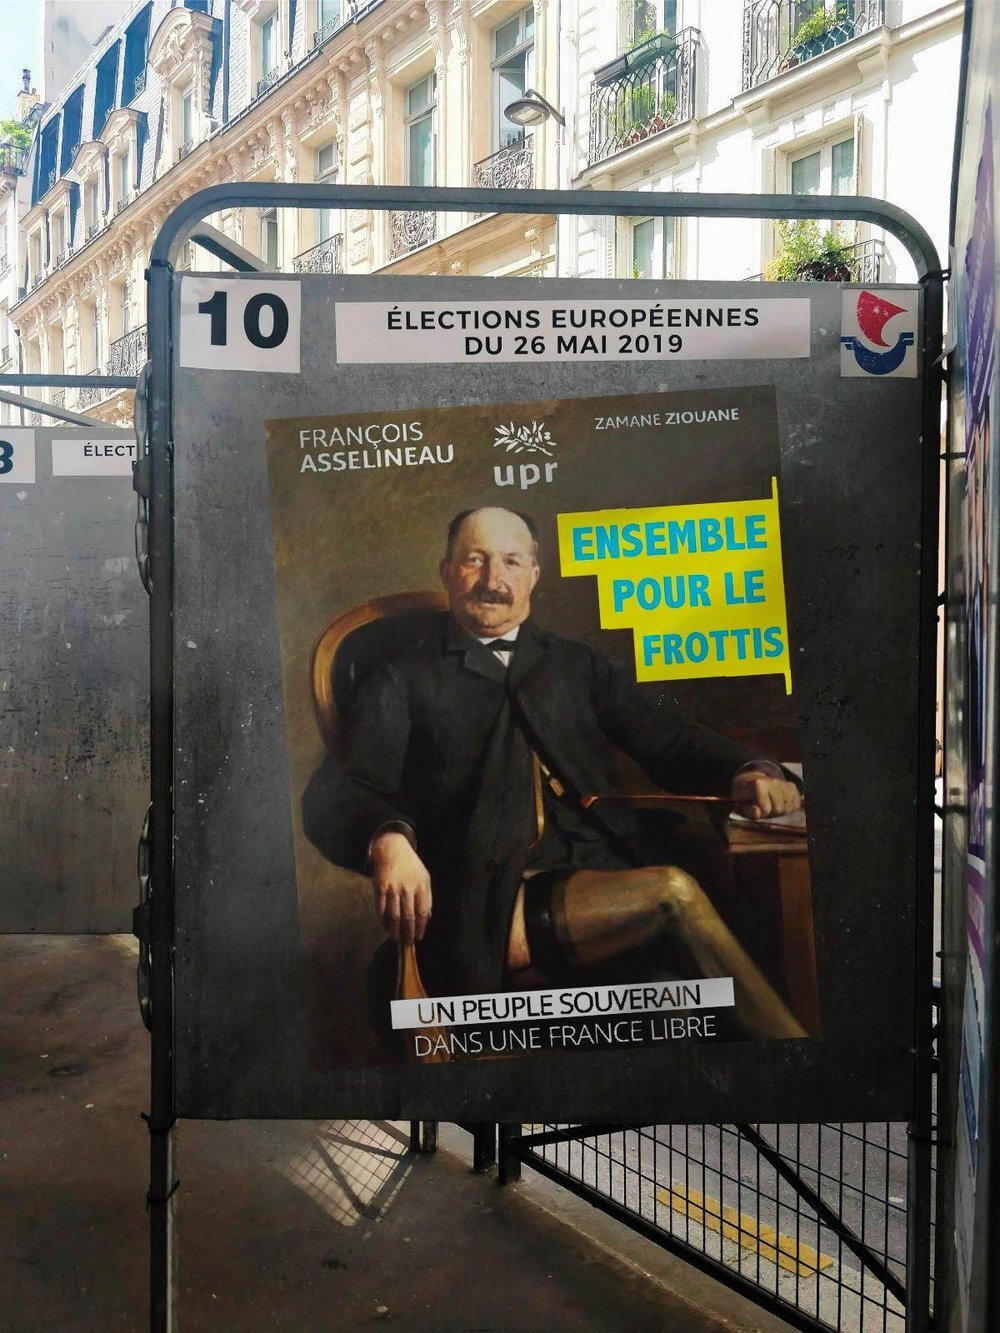 campagne affichage europeenne 2019 les amours contrariees.jpg